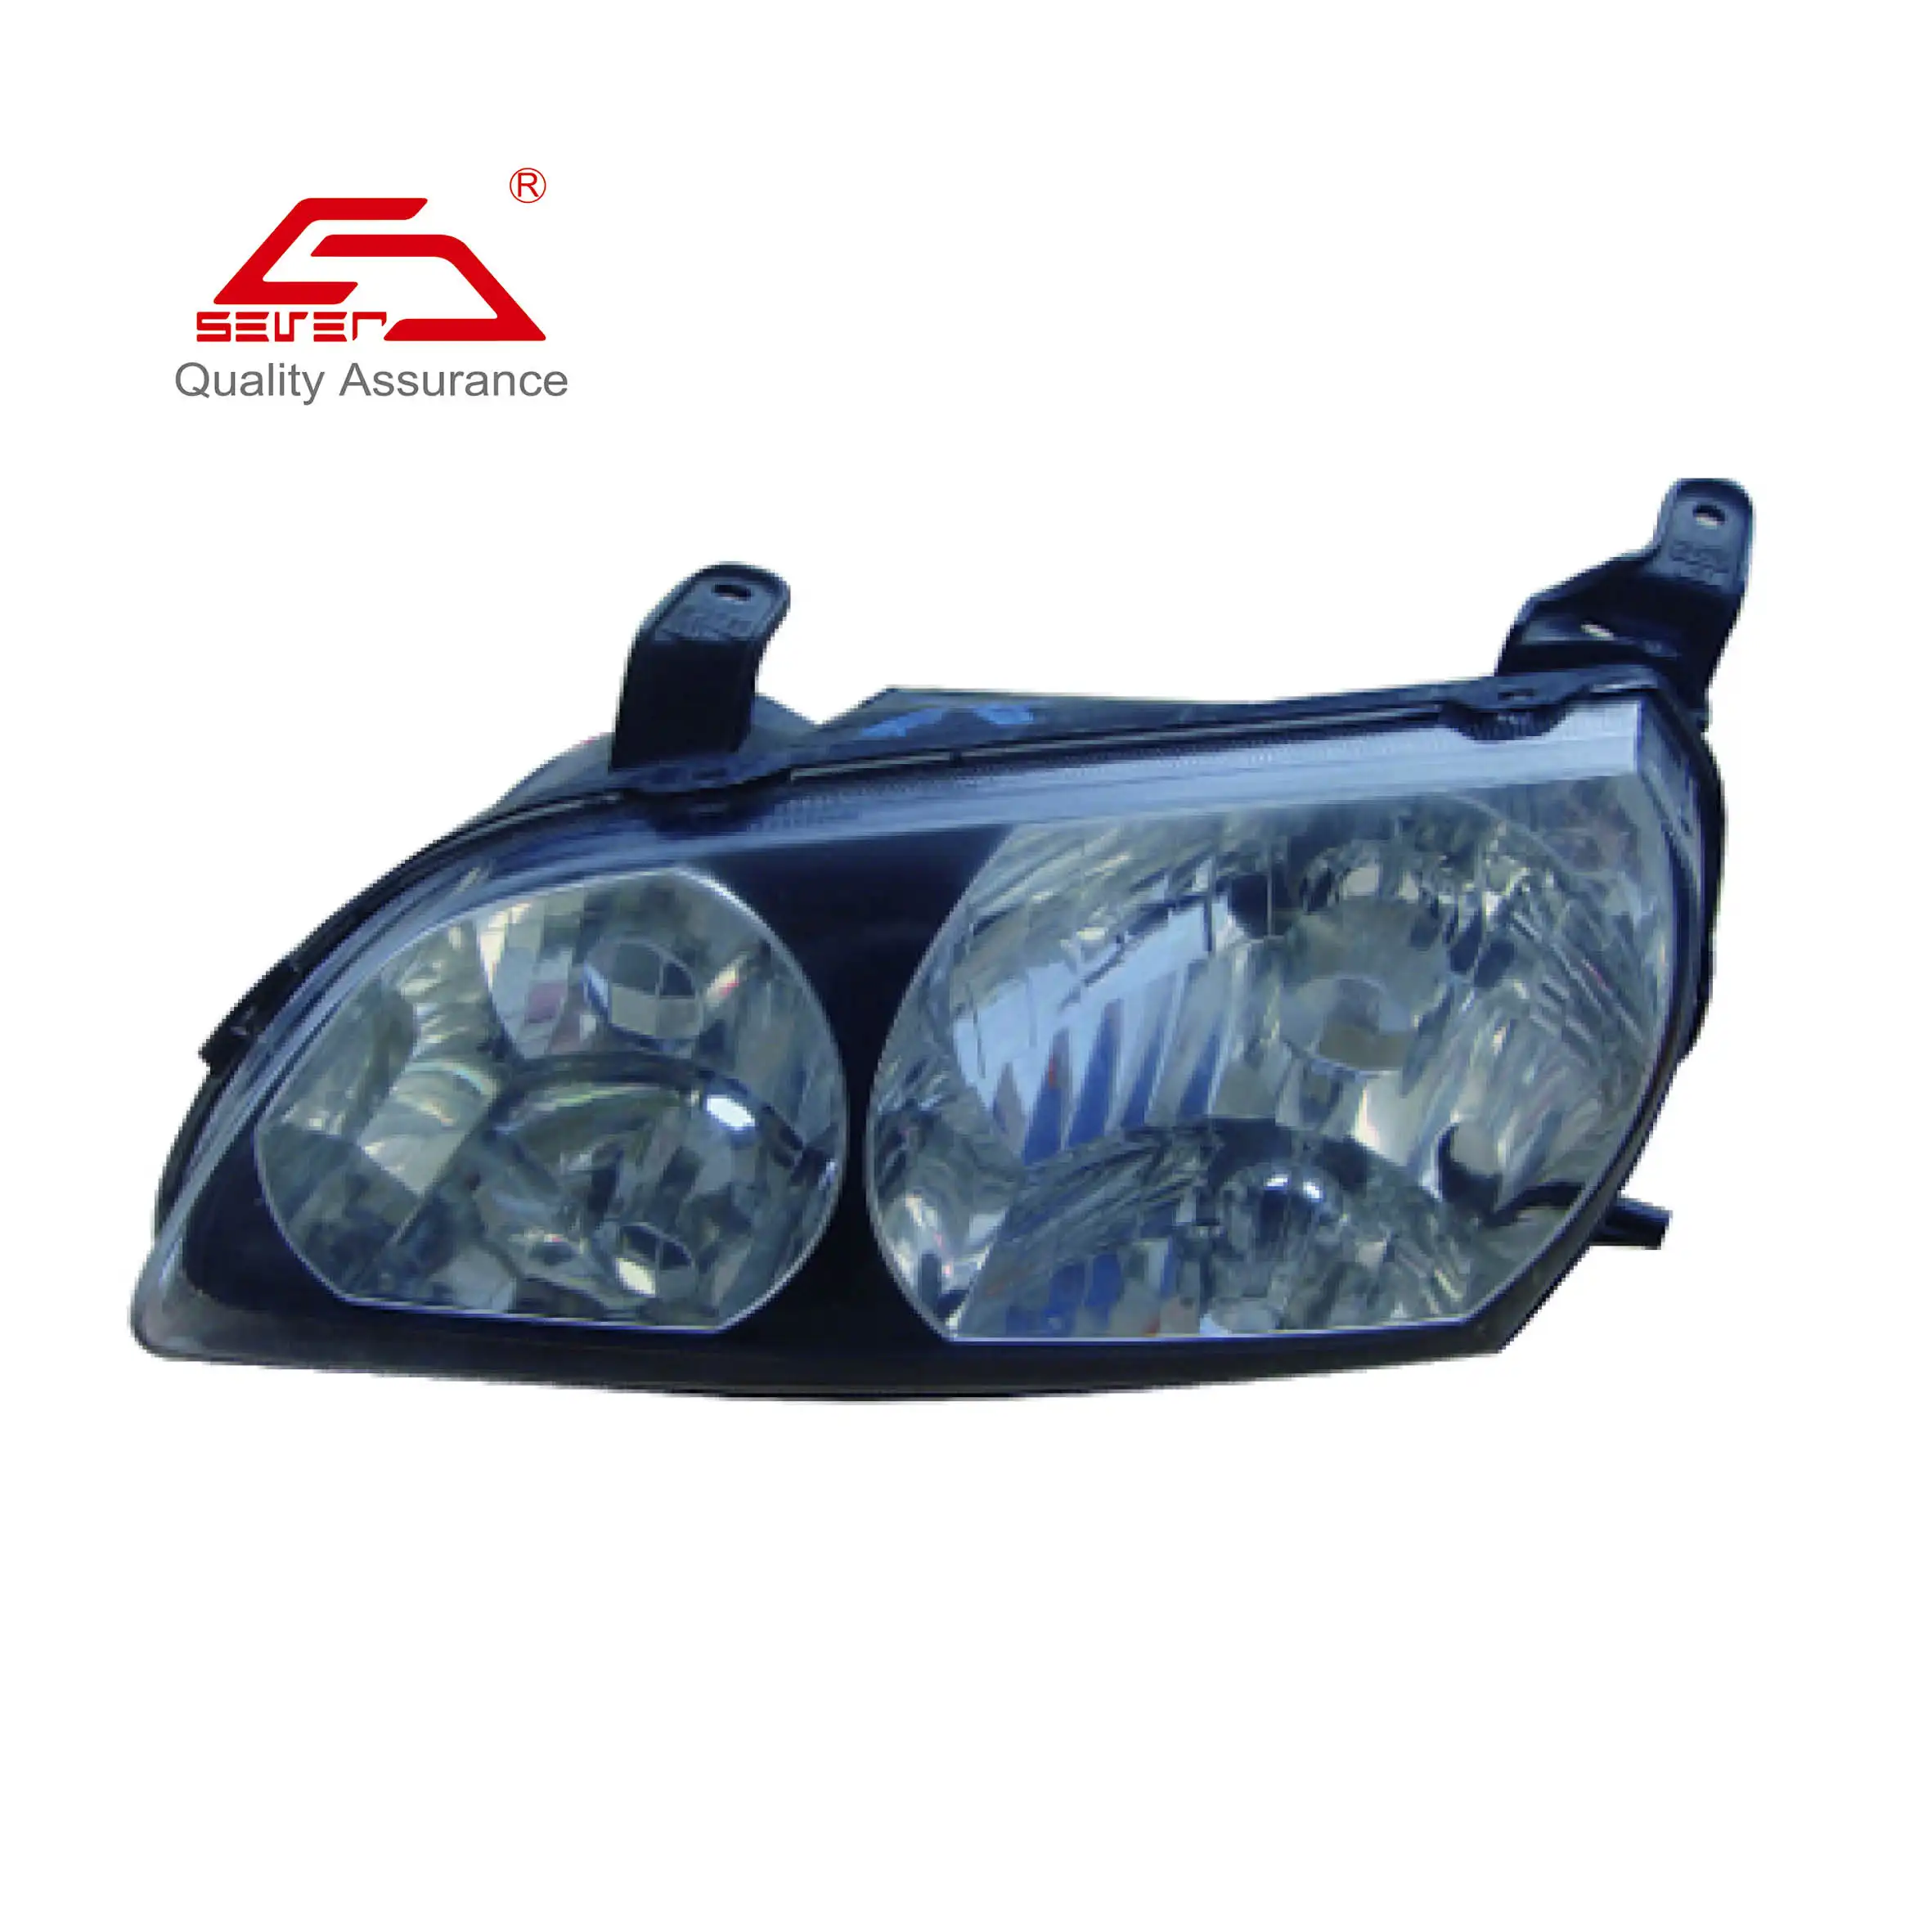 1996-2003 High-quality auto top-selling wholesale Ipsum halogen head lamp for car